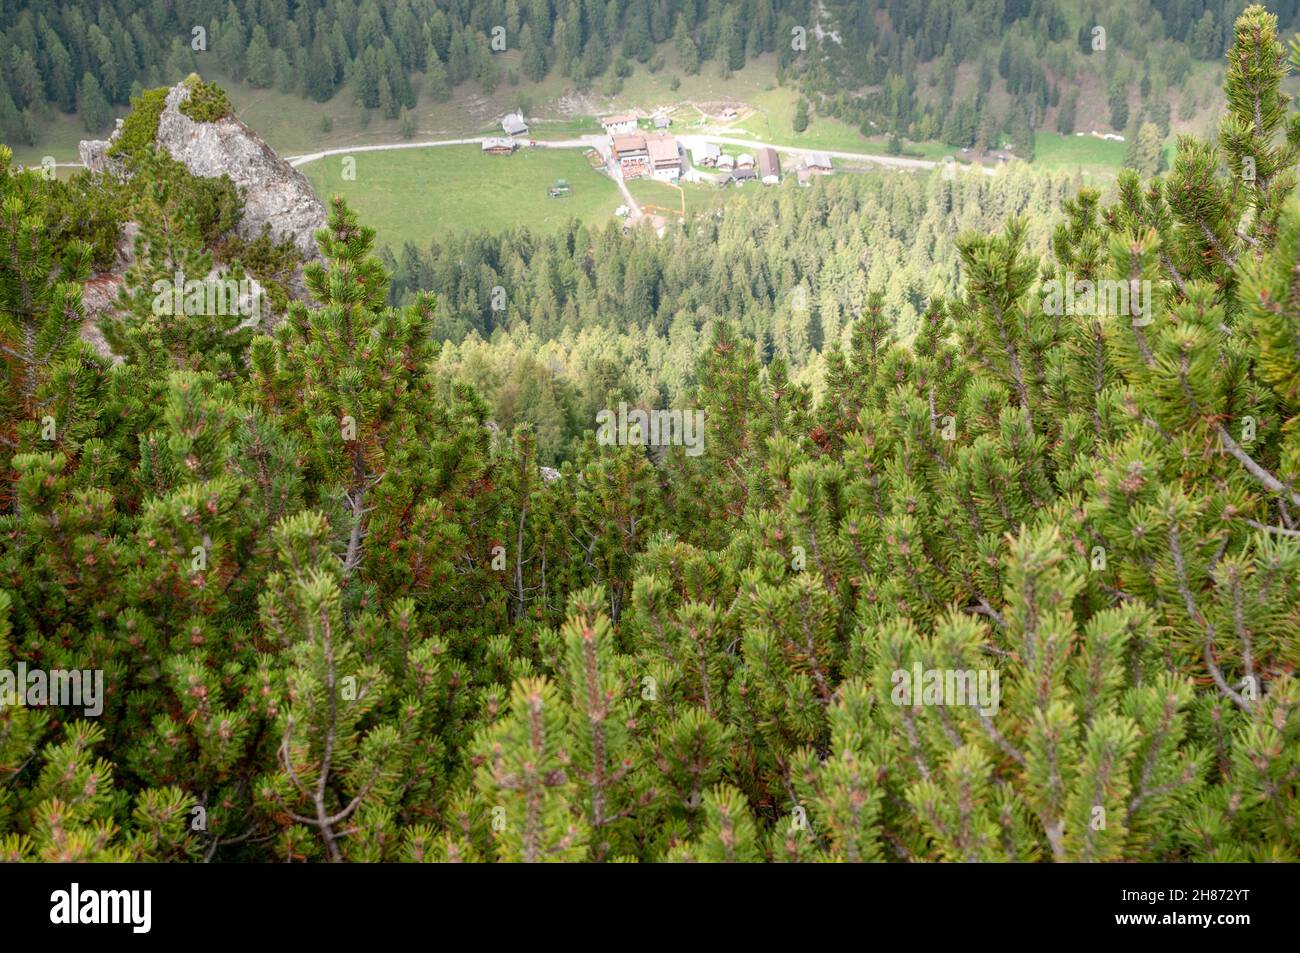 Swiss mountain pine (Pinus mugo) known as creeping pine, dwarf mountainpine, mugo pine, mountain pine or scrub mountain pine is a species of conifer, Stock Photo